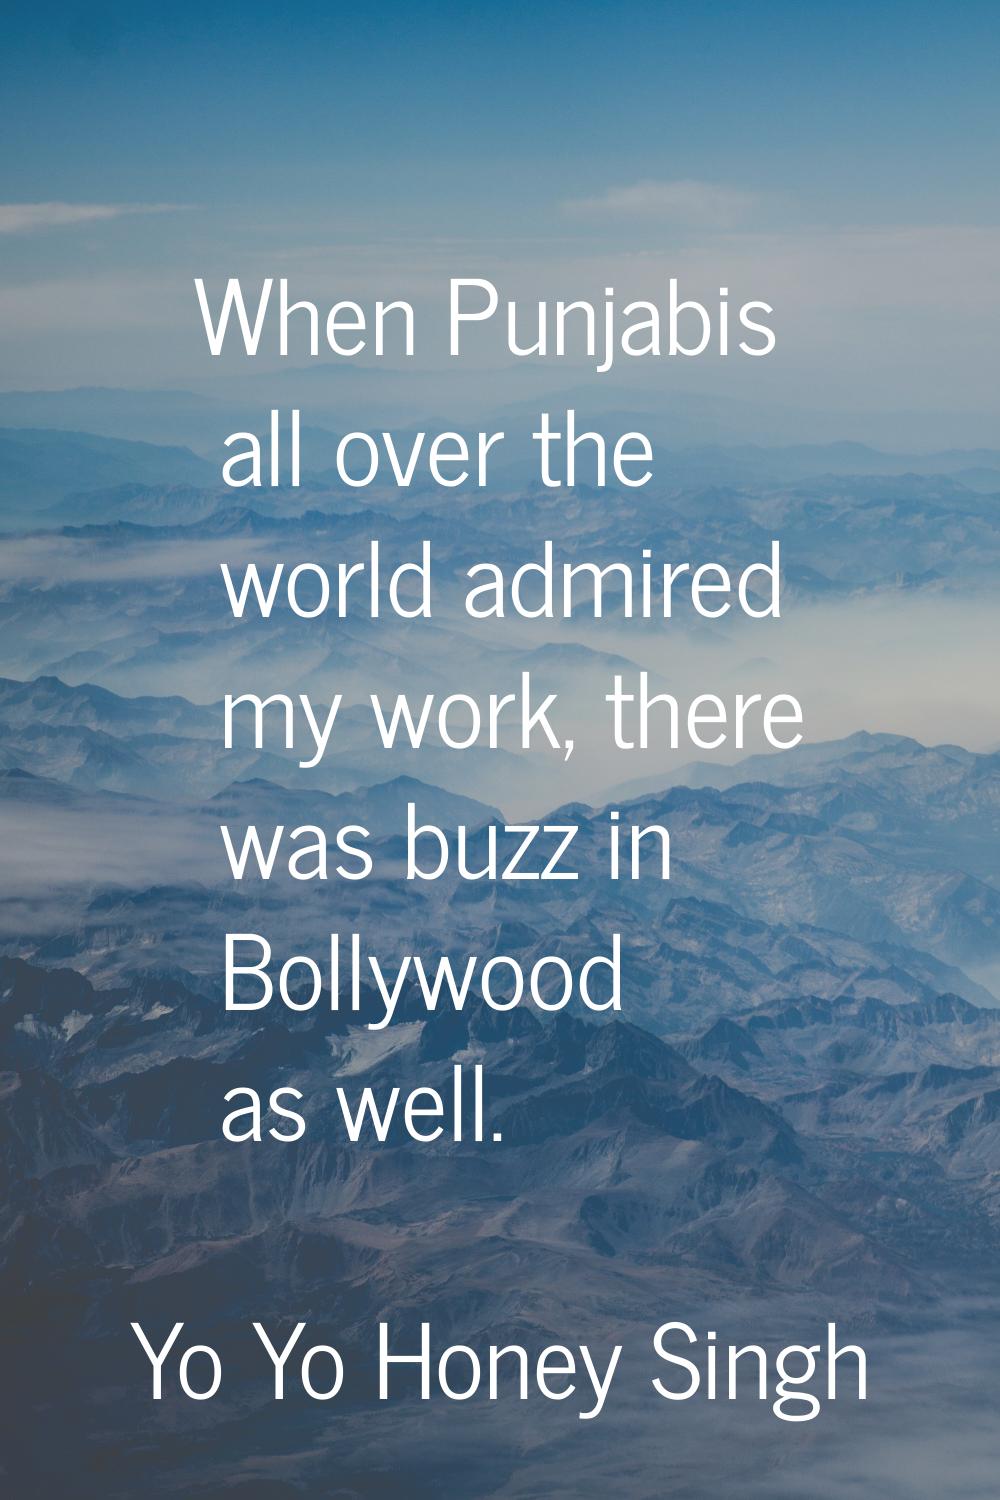 When Punjabis all over the world admired my work, there was buzz in Bollywood as well.